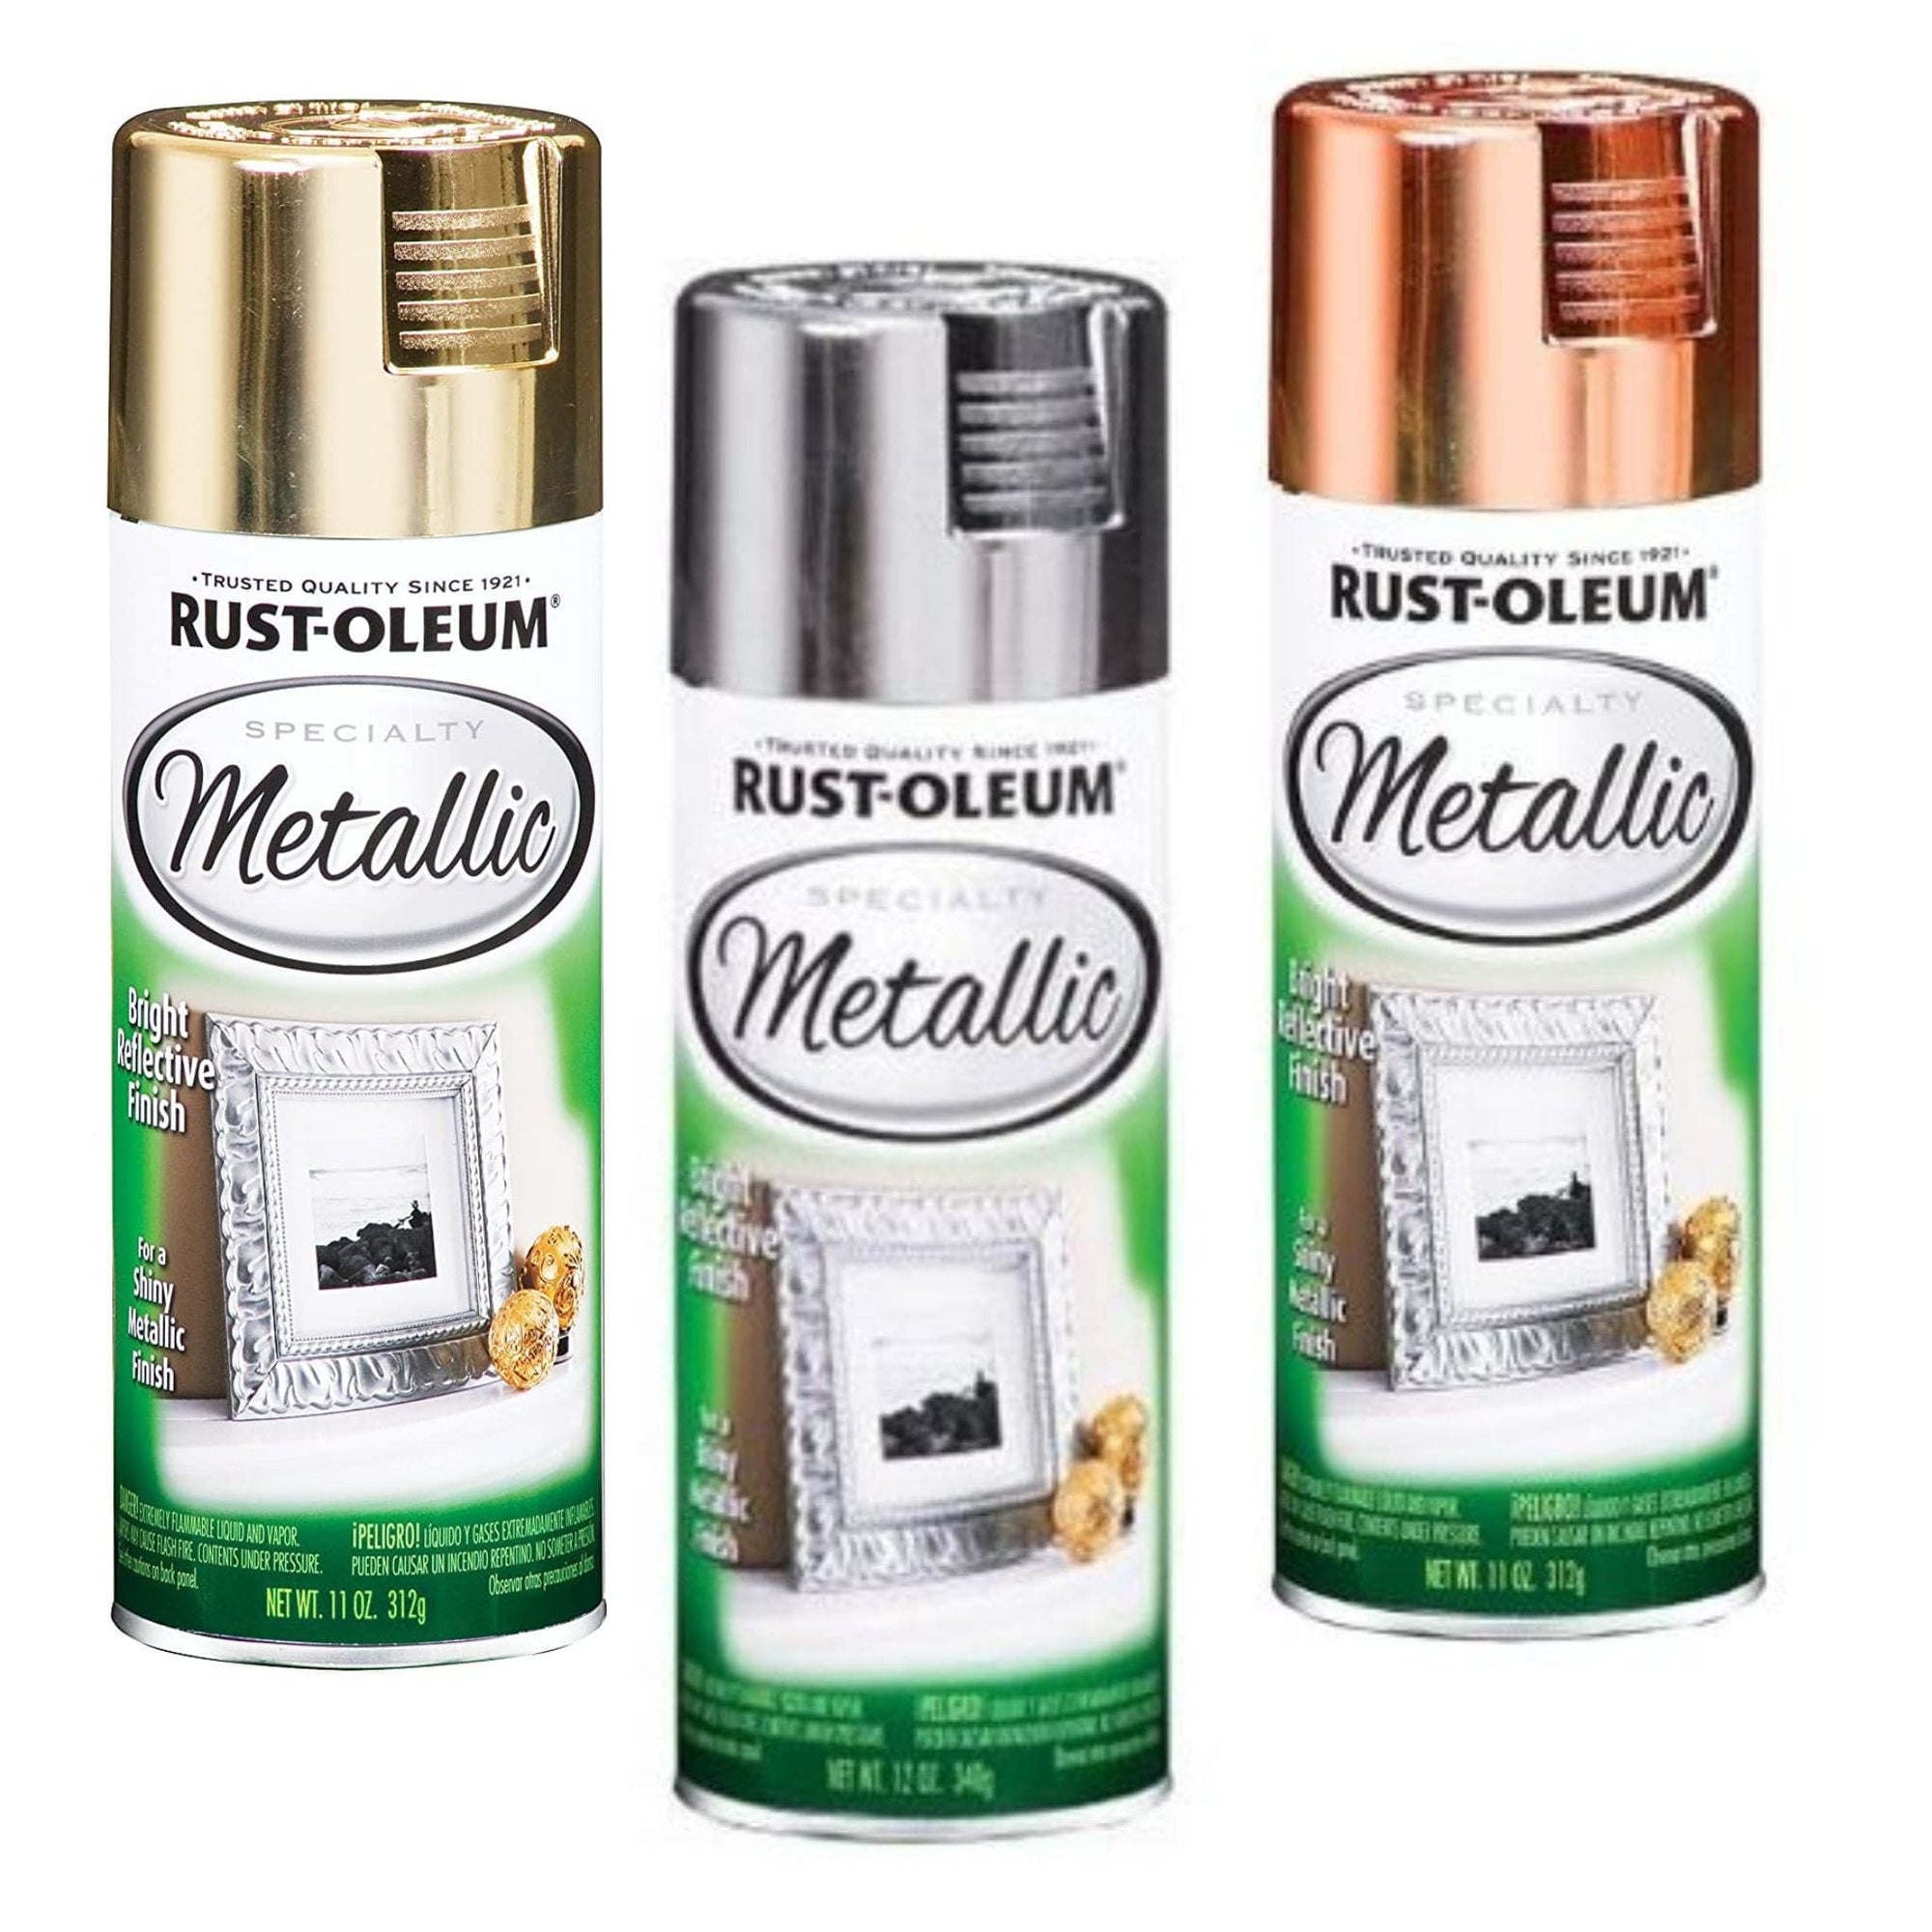 Rust-Oleum Speciality Metallic Bright Reflective Finish - 312g Spray - South East Clearance Centre